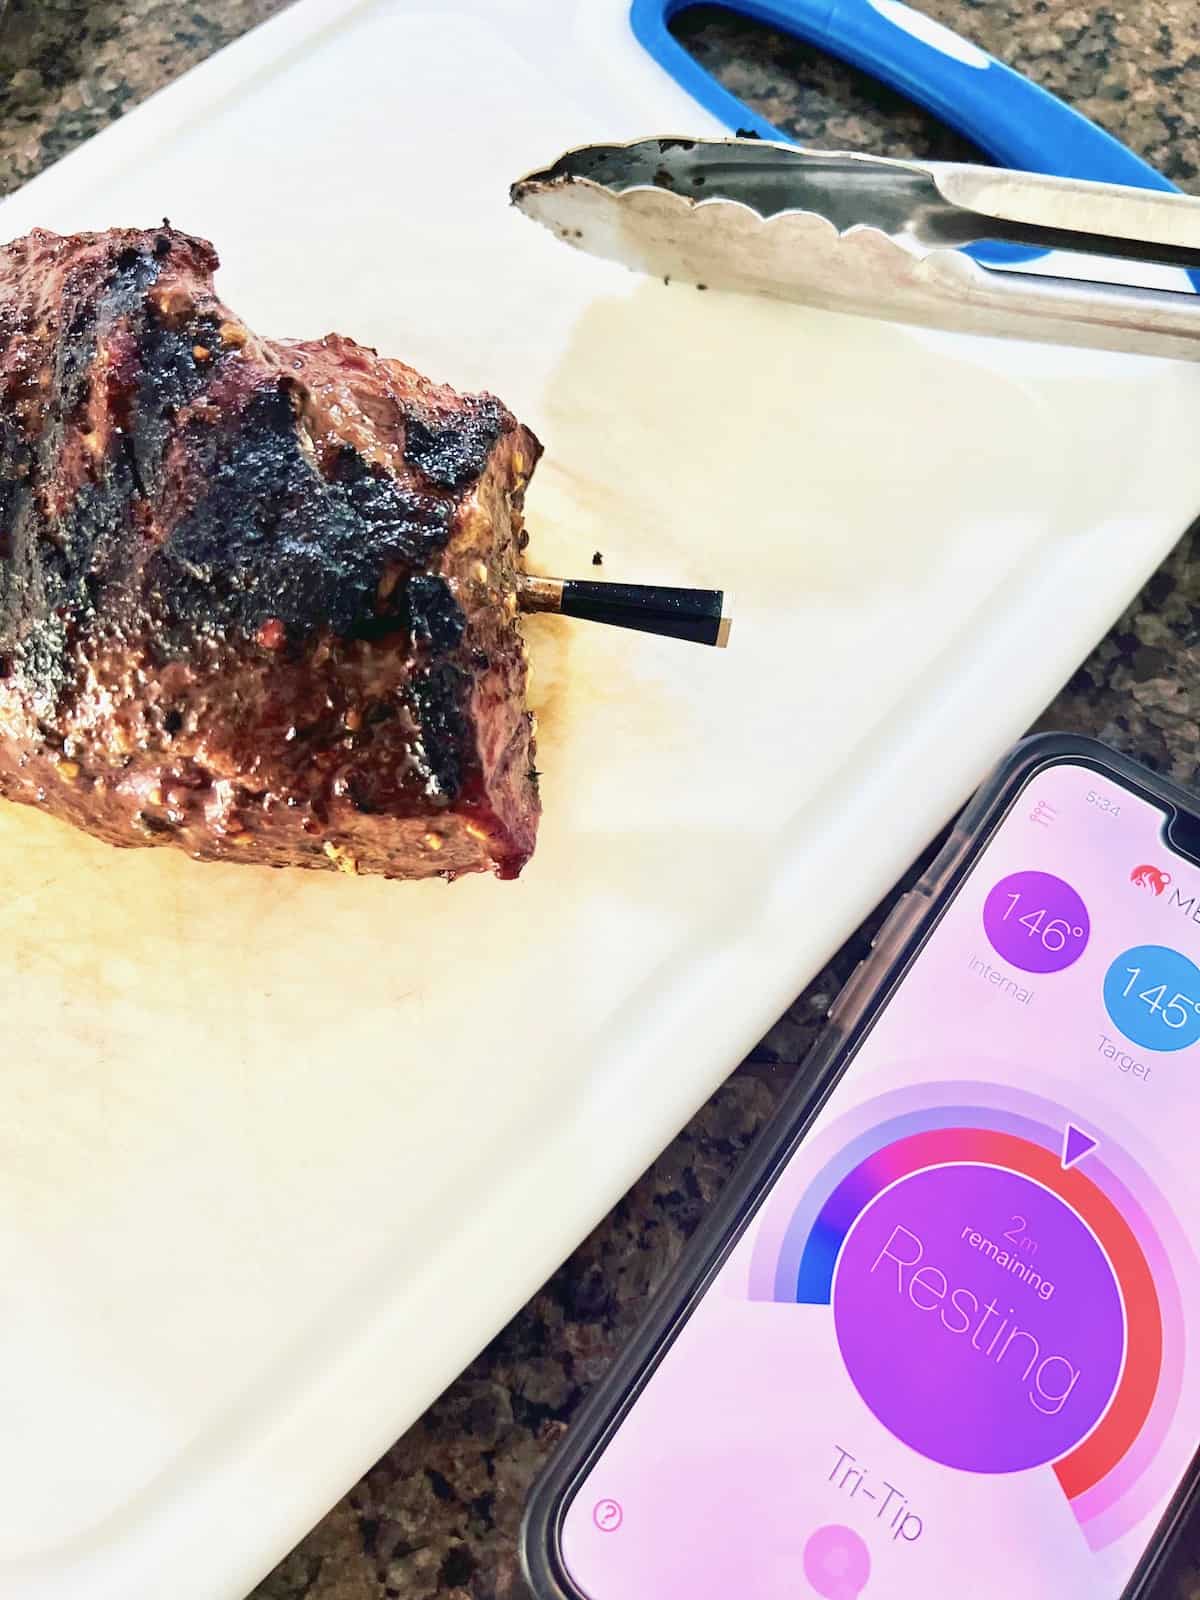 Grilled Tri-Tip on the cutting board with the Meater prob sticking out and the app open on a phone showing it is resting.